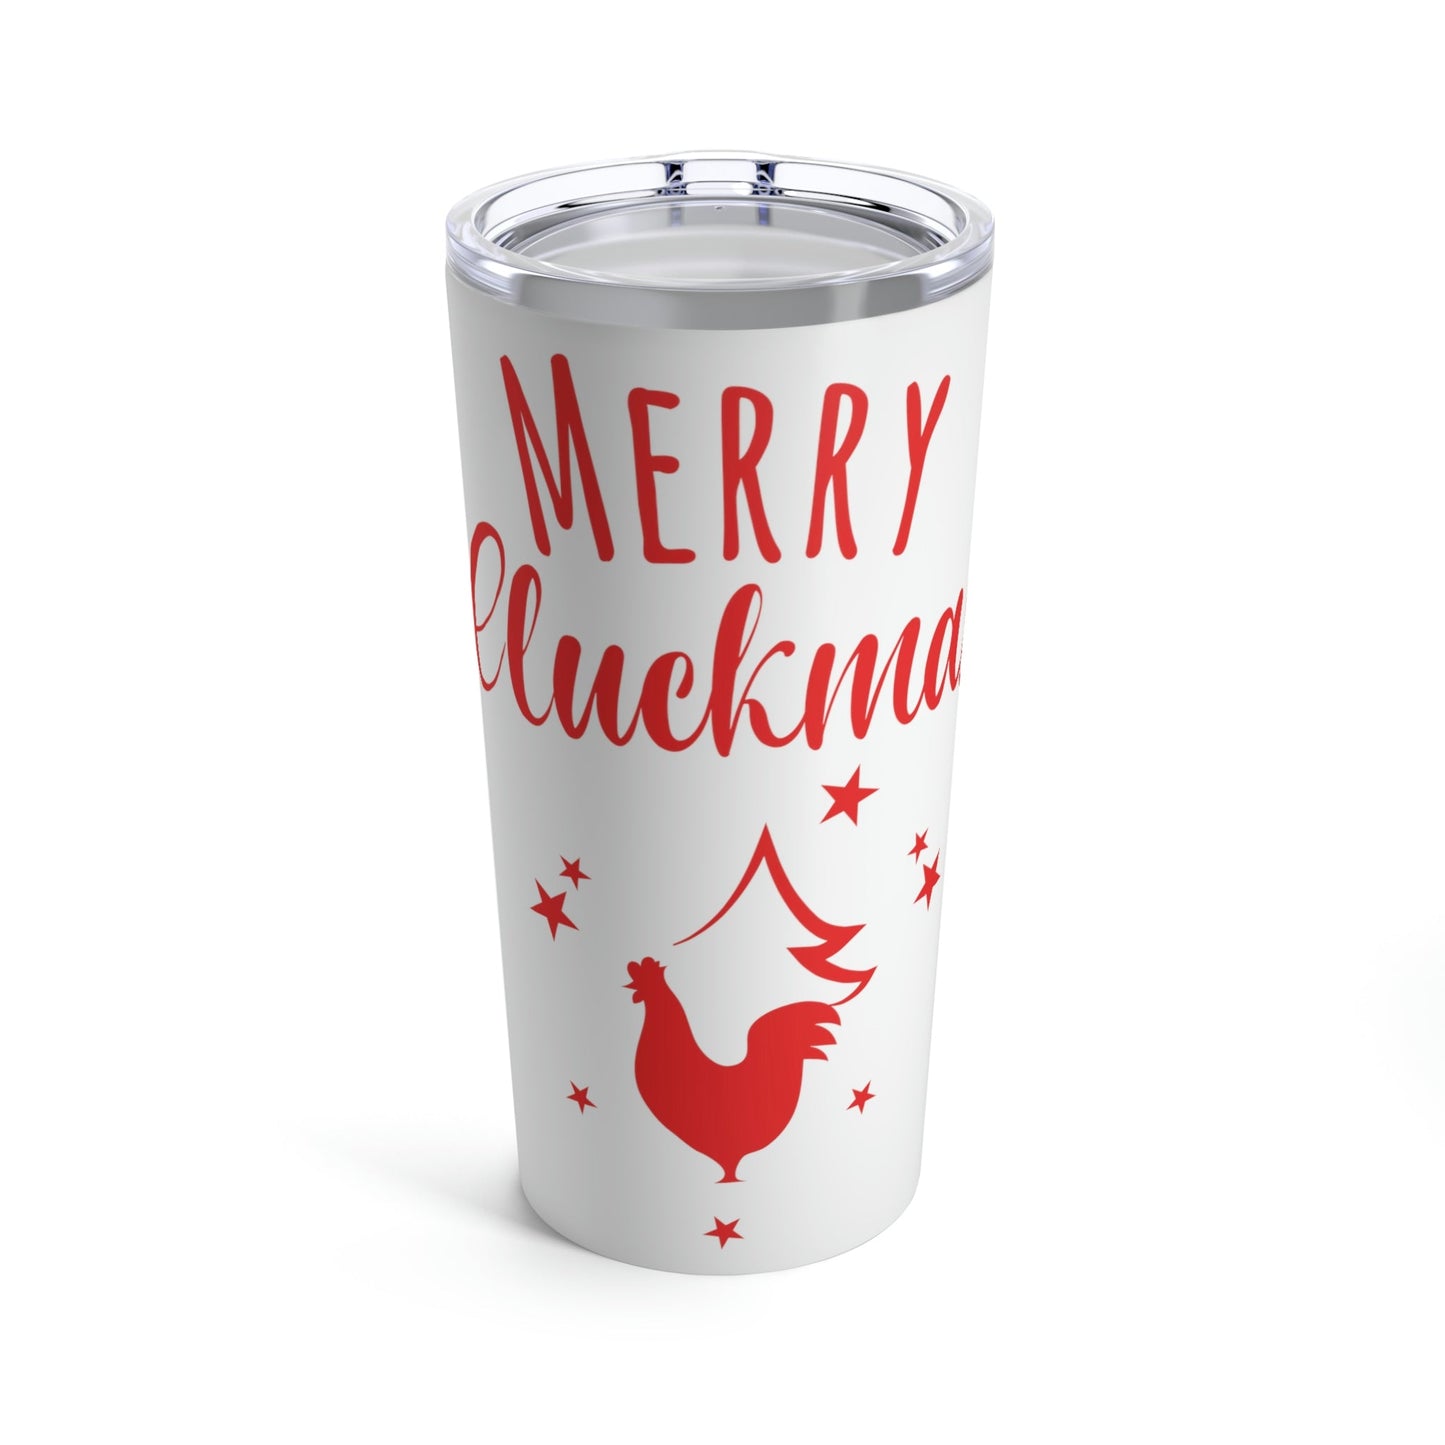 Merry Cluckmas Happy New Year Christmas Quotes Stainless Steel Hot or Cold Vacuum Tumbler 20oz Ichaku [Perfect Gifts Selection]